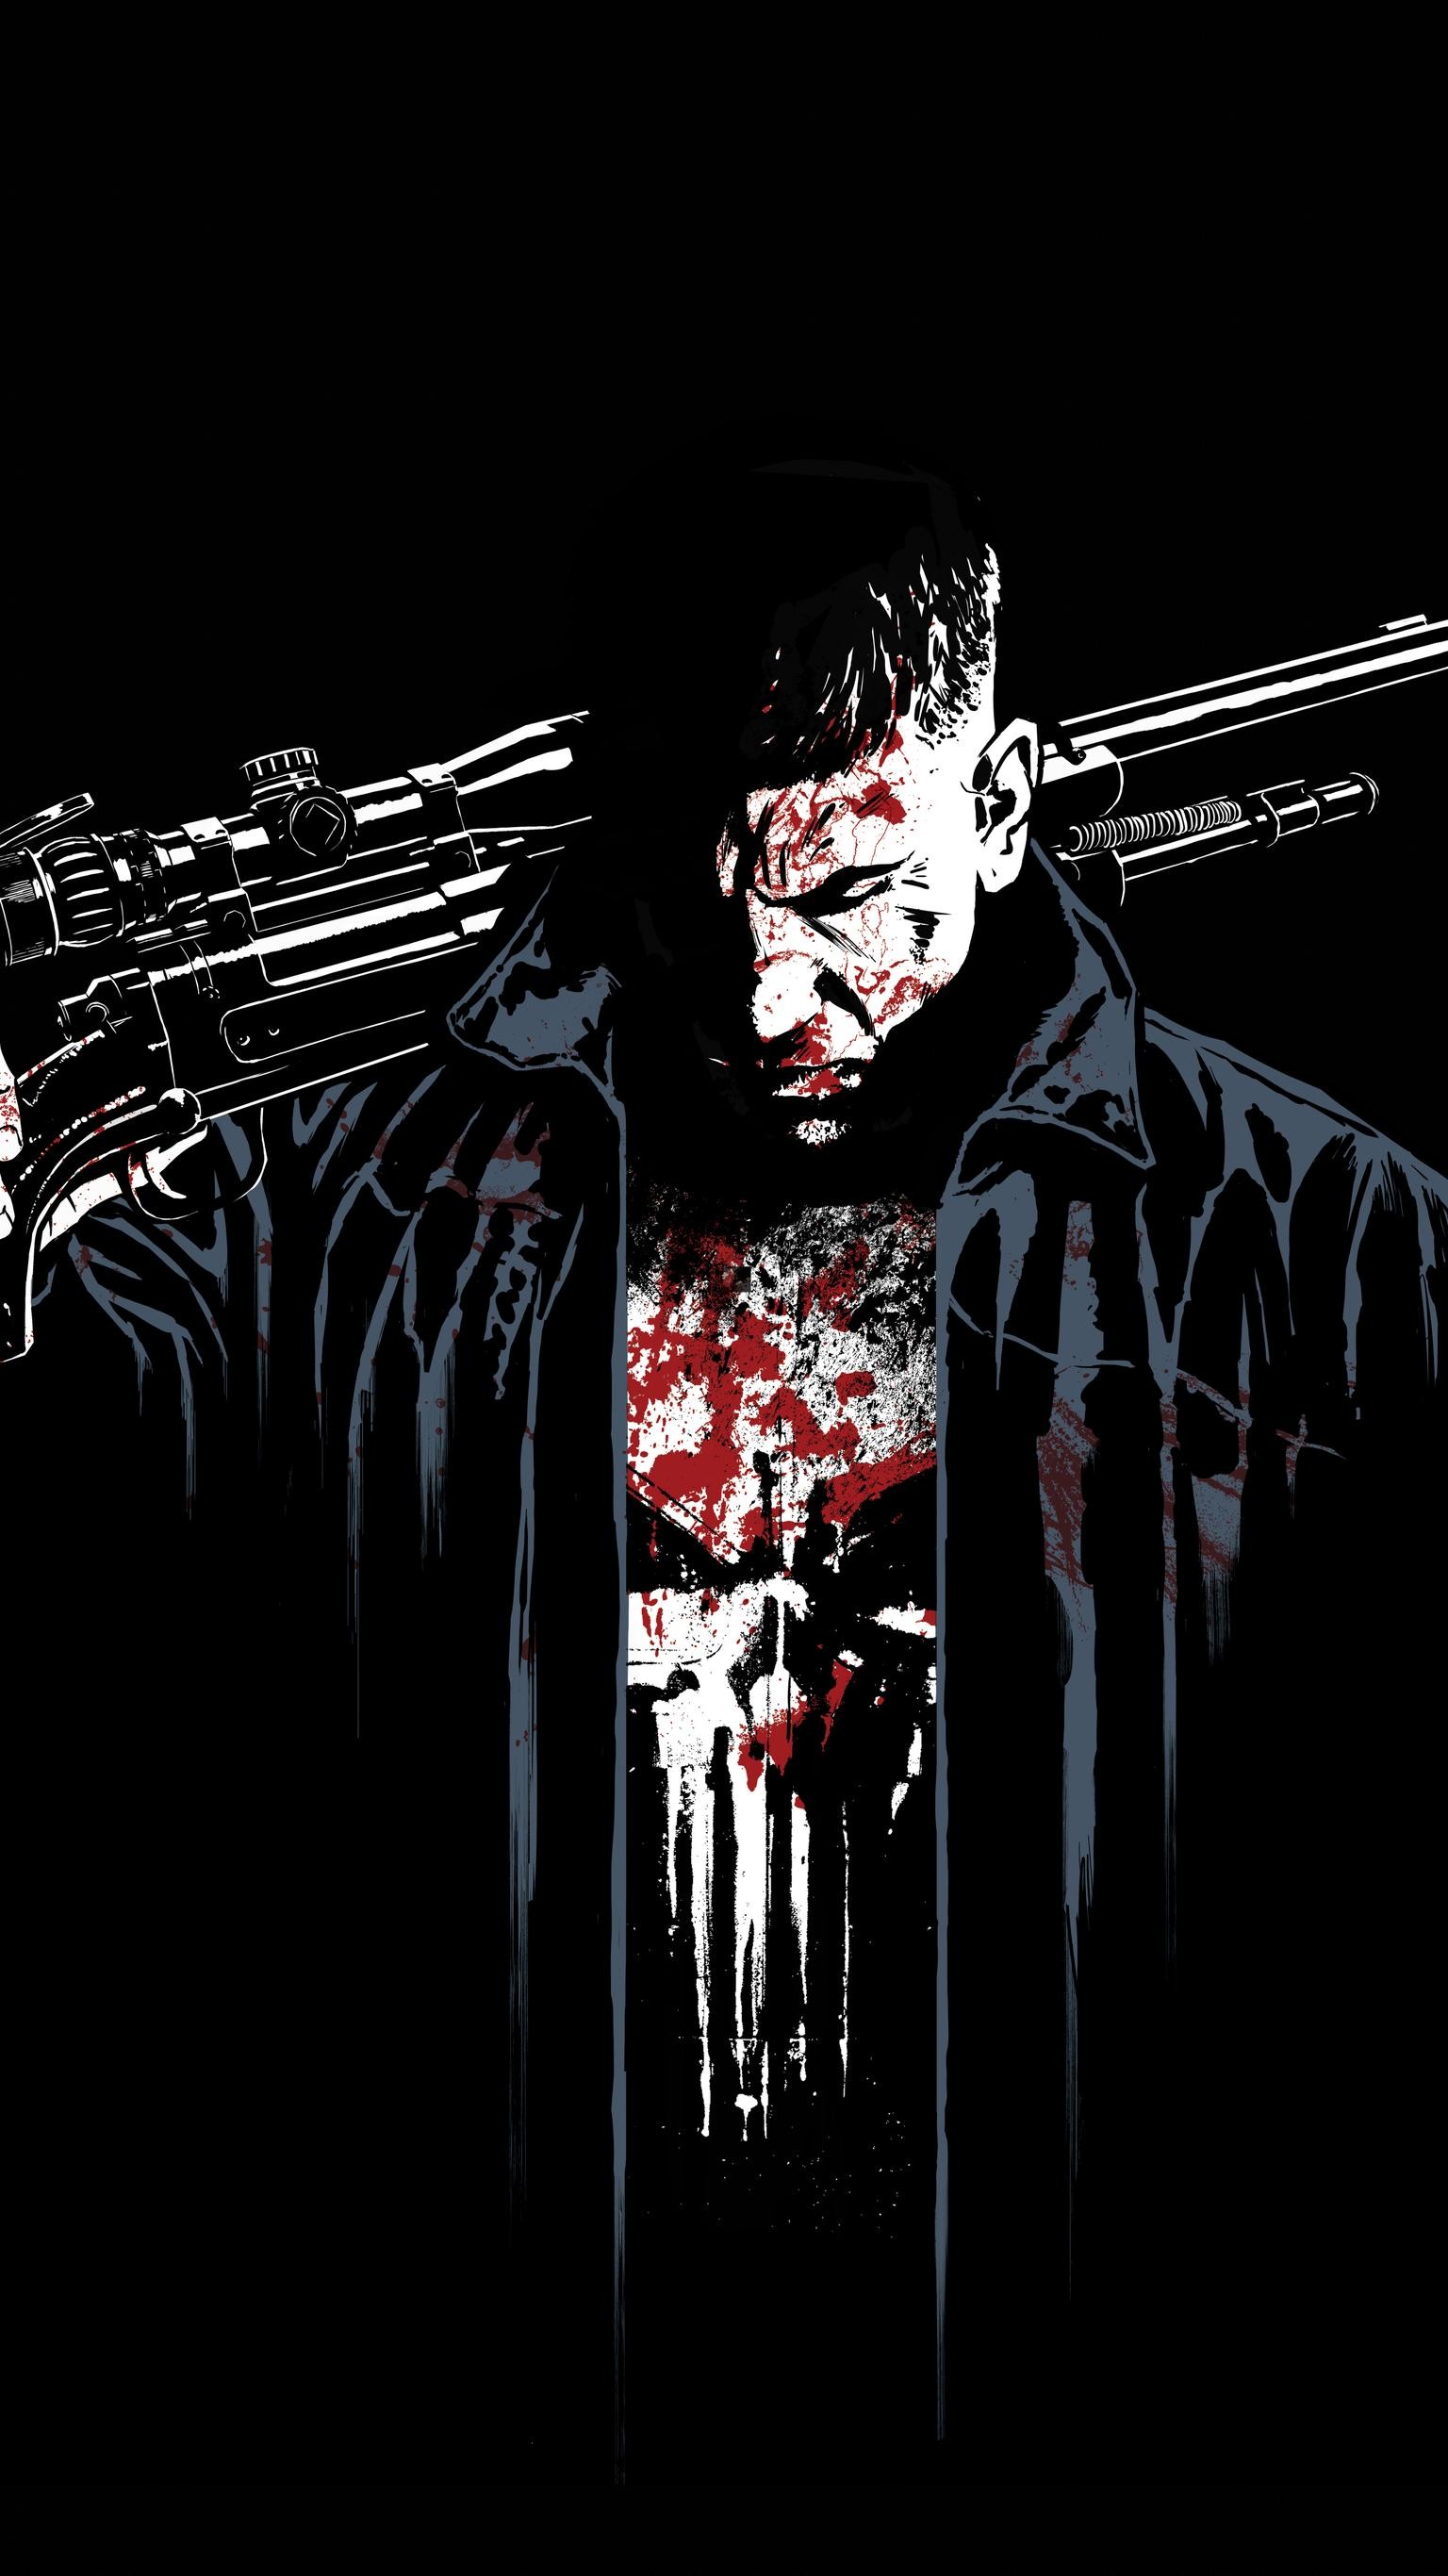 1536x2732, Wallpaper For Marvel S The Punisher - Punisher Android Wallpaper Hd - HD Wallpaper 